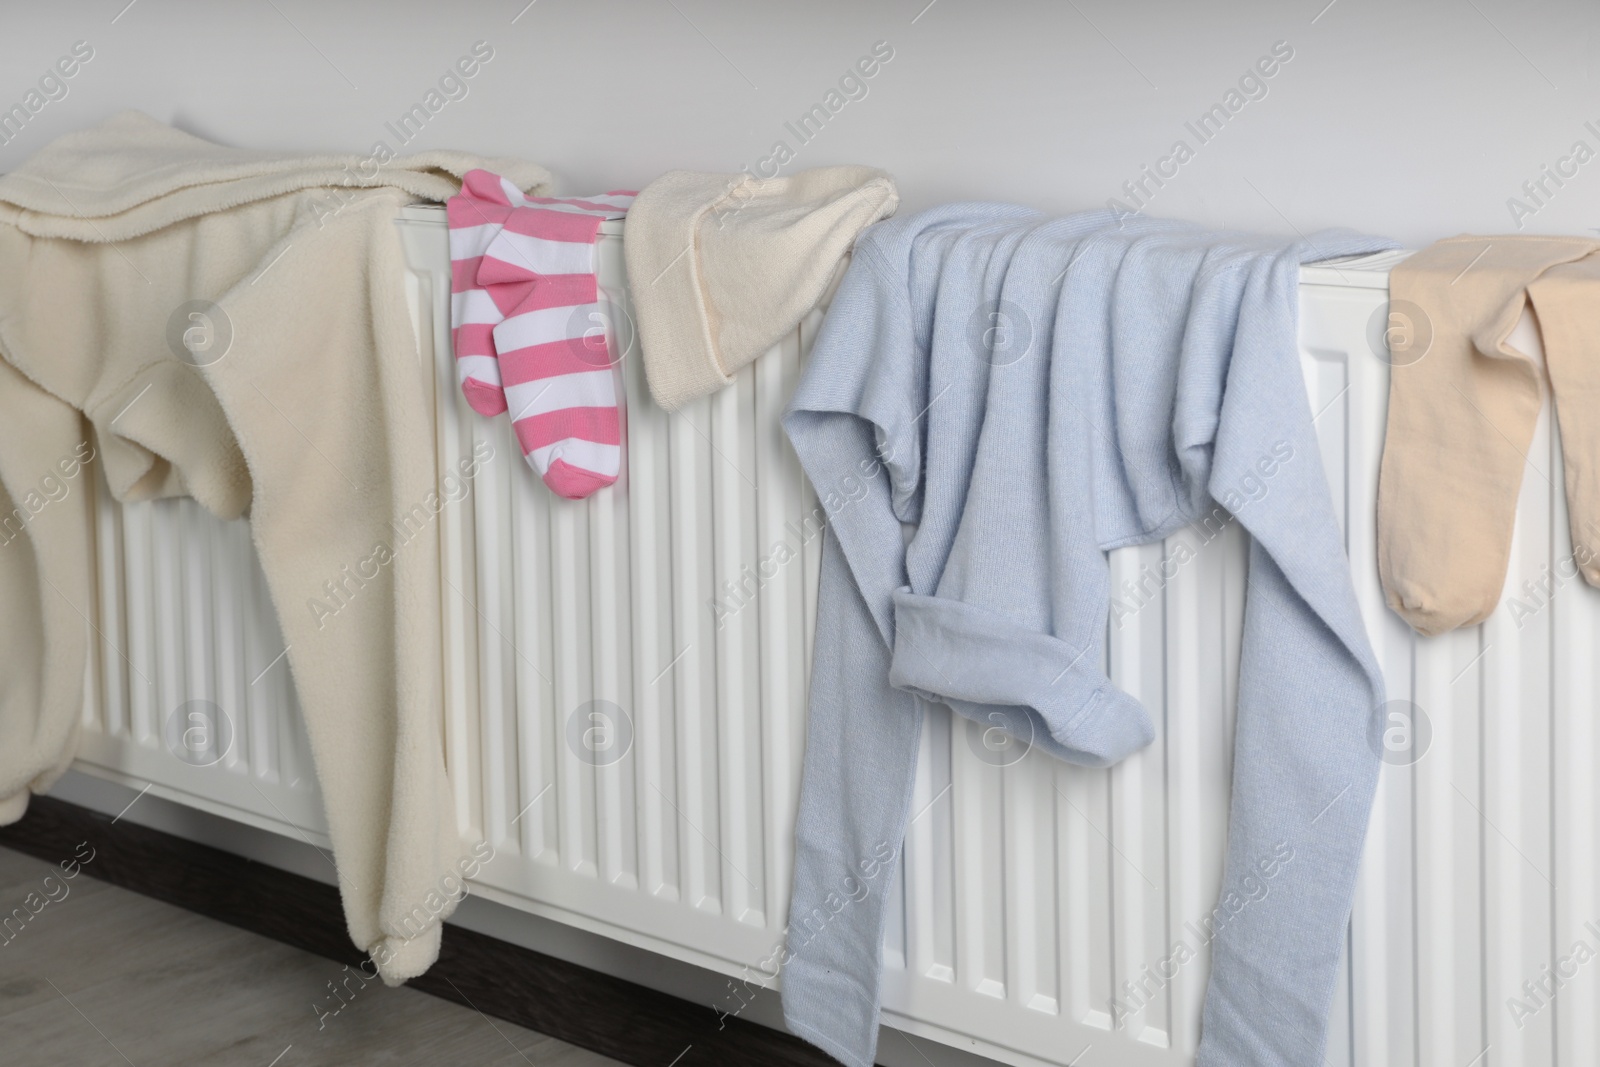 Photo of Clean clothes on white heating radiator indoors